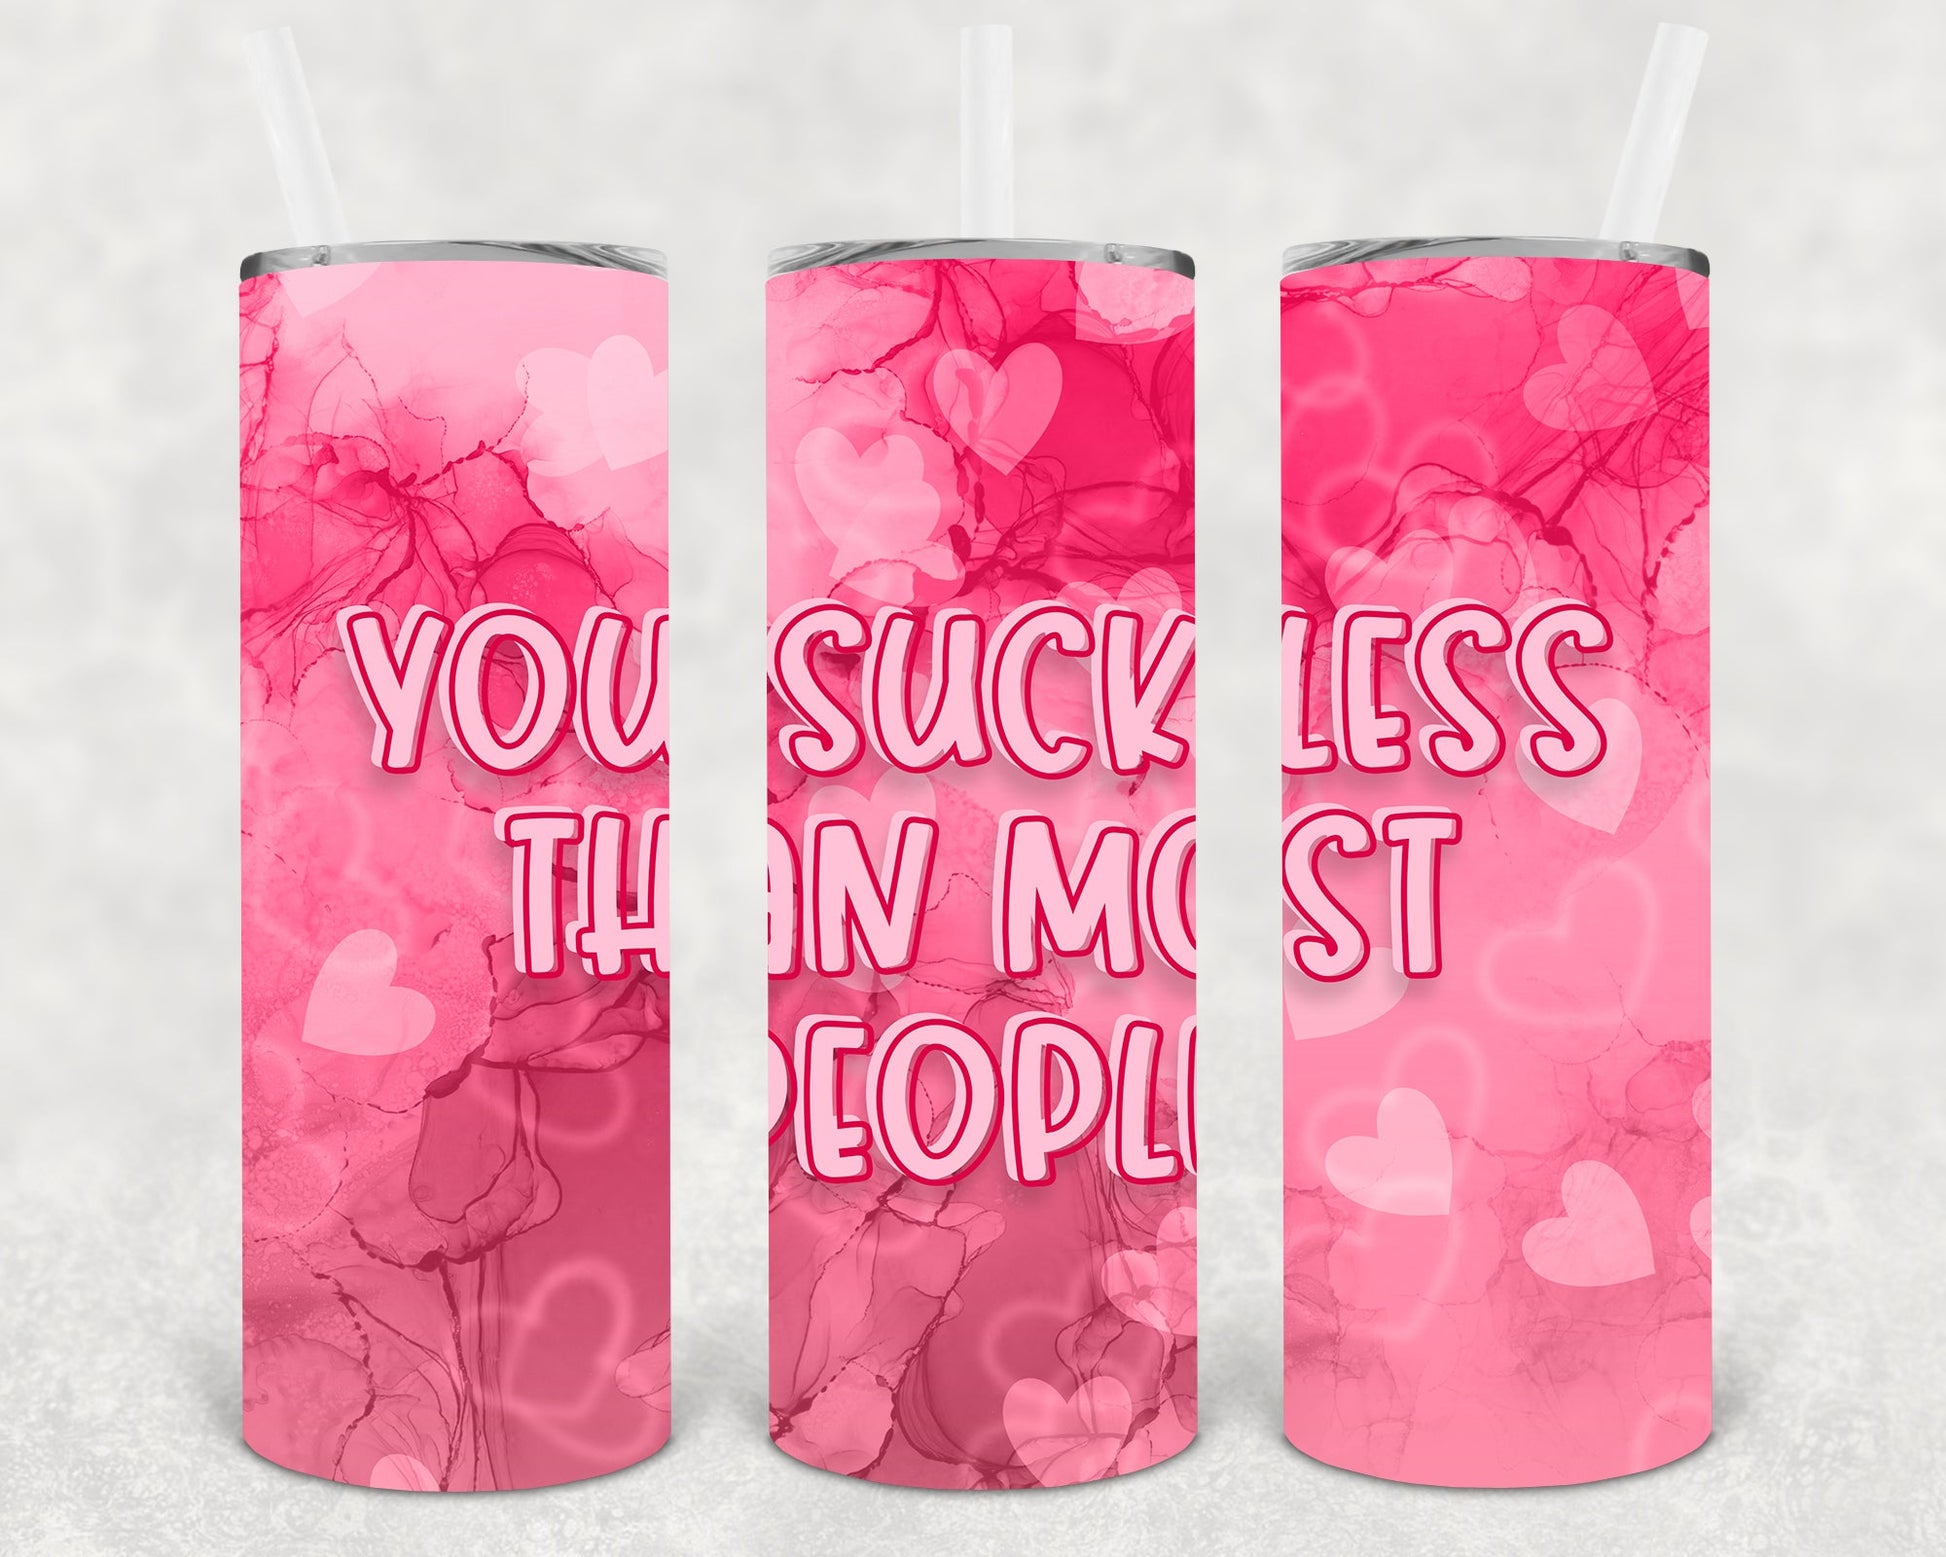 You Suck Less Than Most People 20 Oz Skinny Tumbler